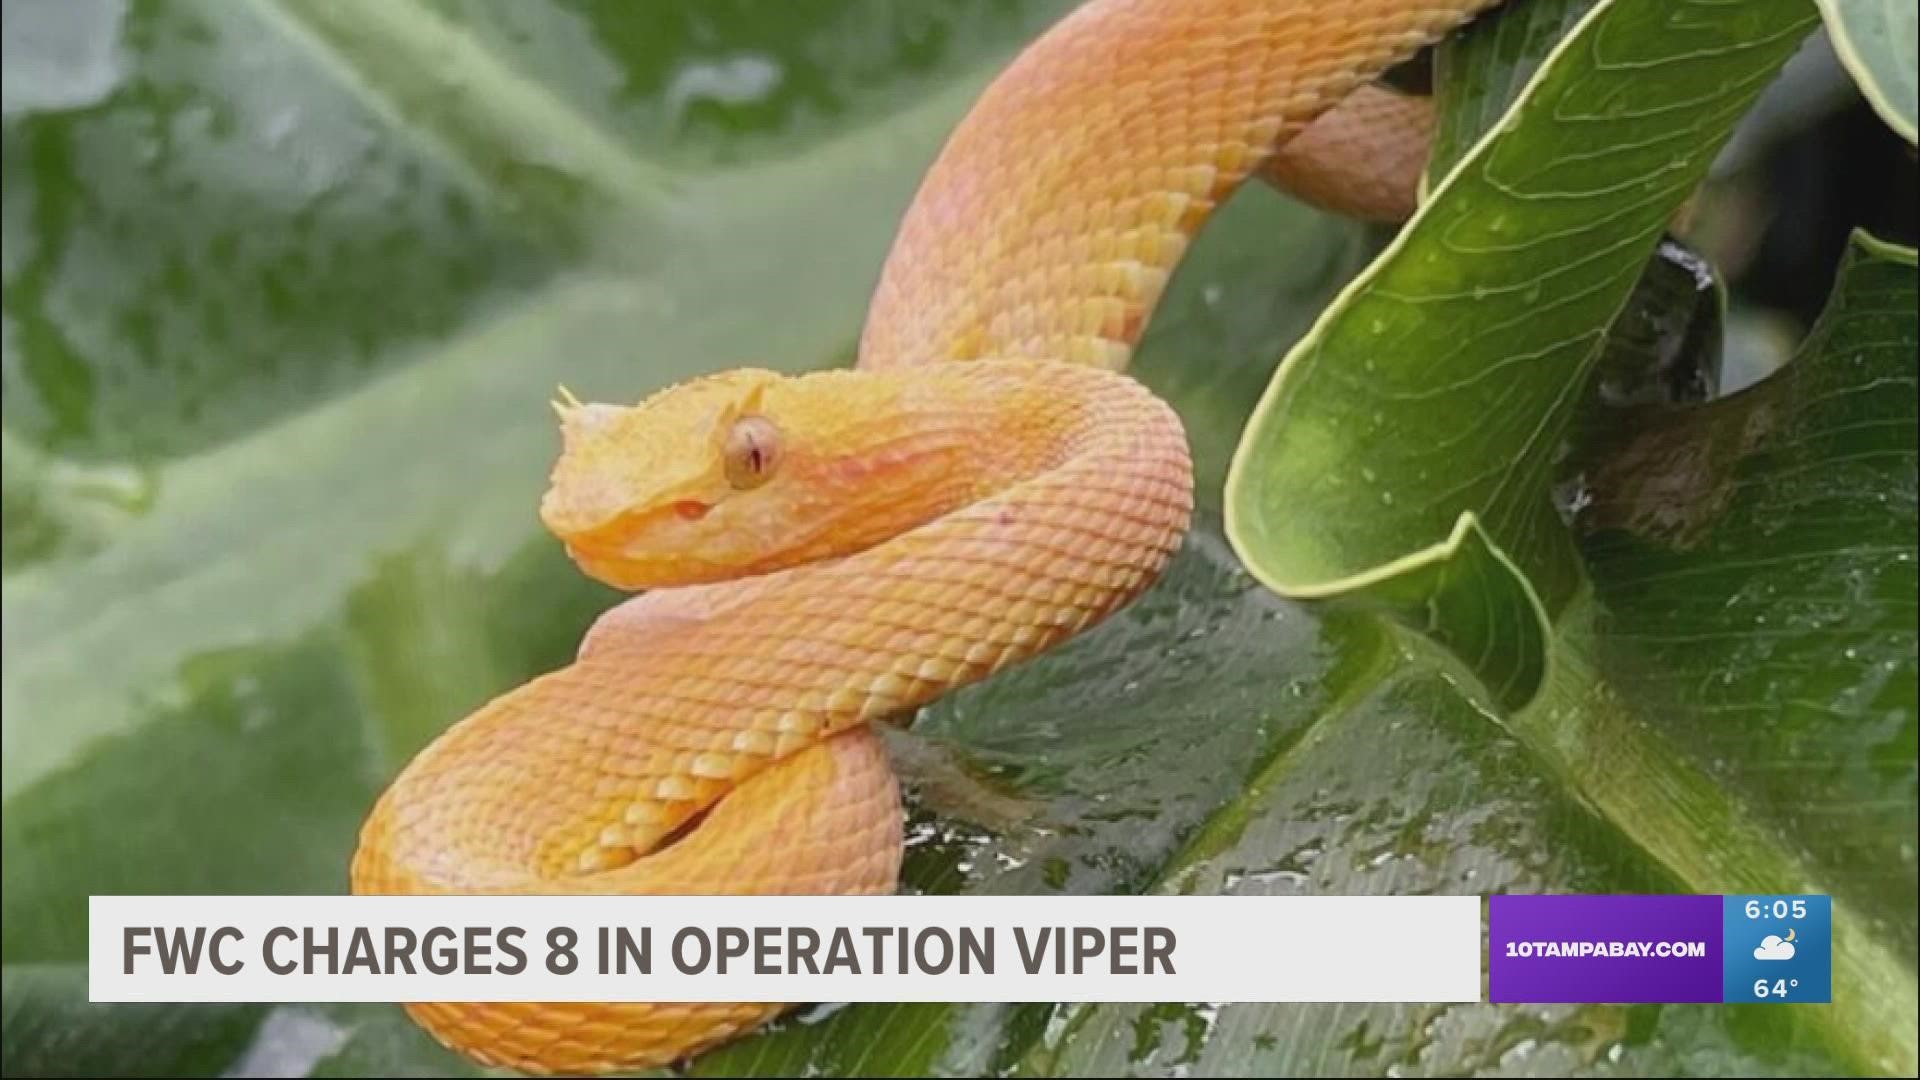 Officers went undercover for two years during the operation, infiltrating the black market for the highly illegal and exceedingly dangerous species.